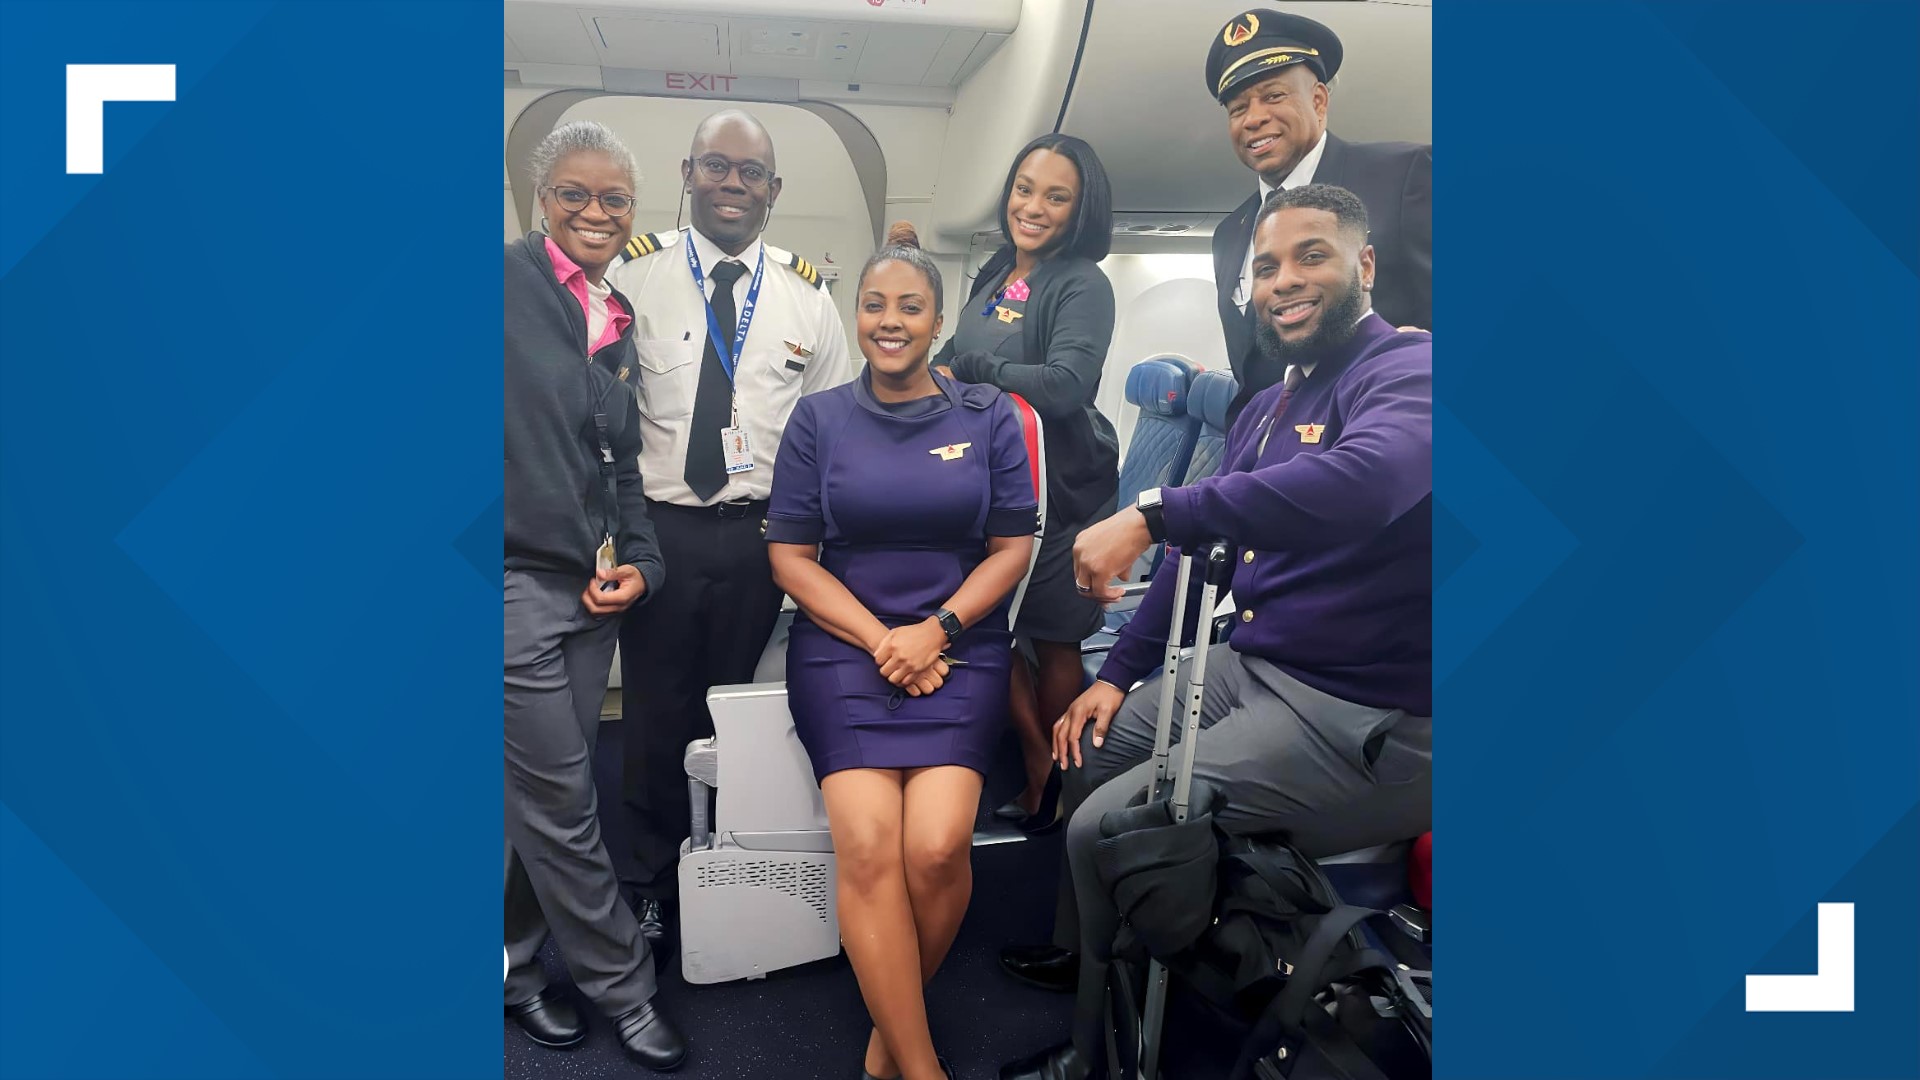 Want to be a Delta flight attendant? Applications now open